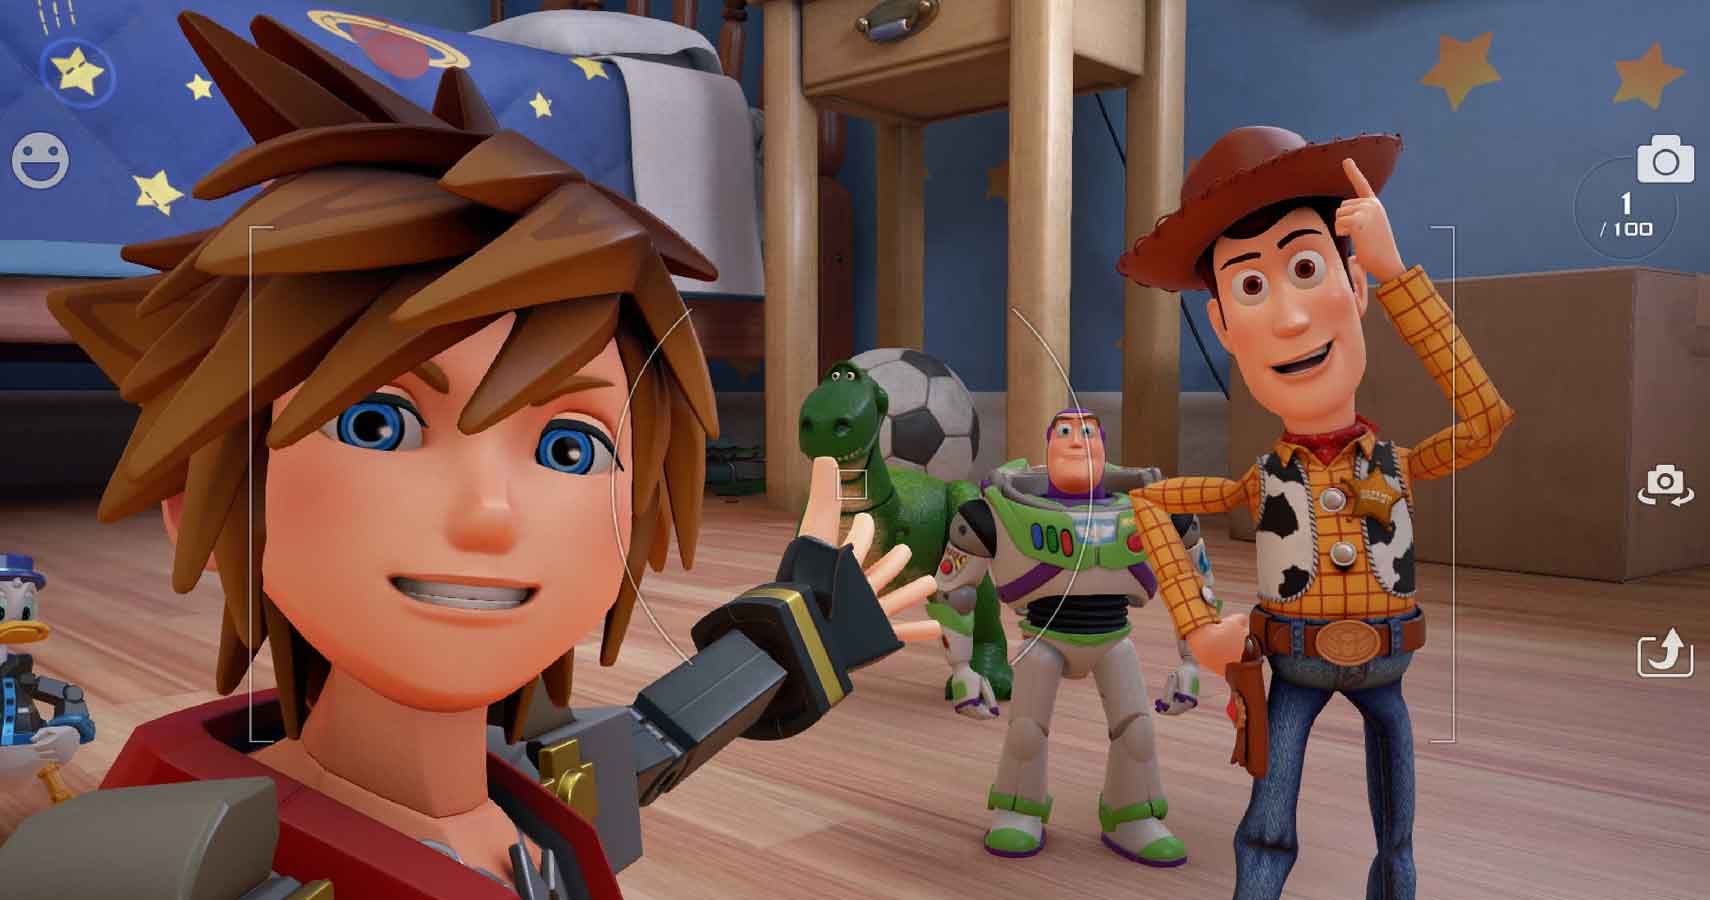 Sora taking a selfie with Woody and Buzz in Kingdom Hearts 3 